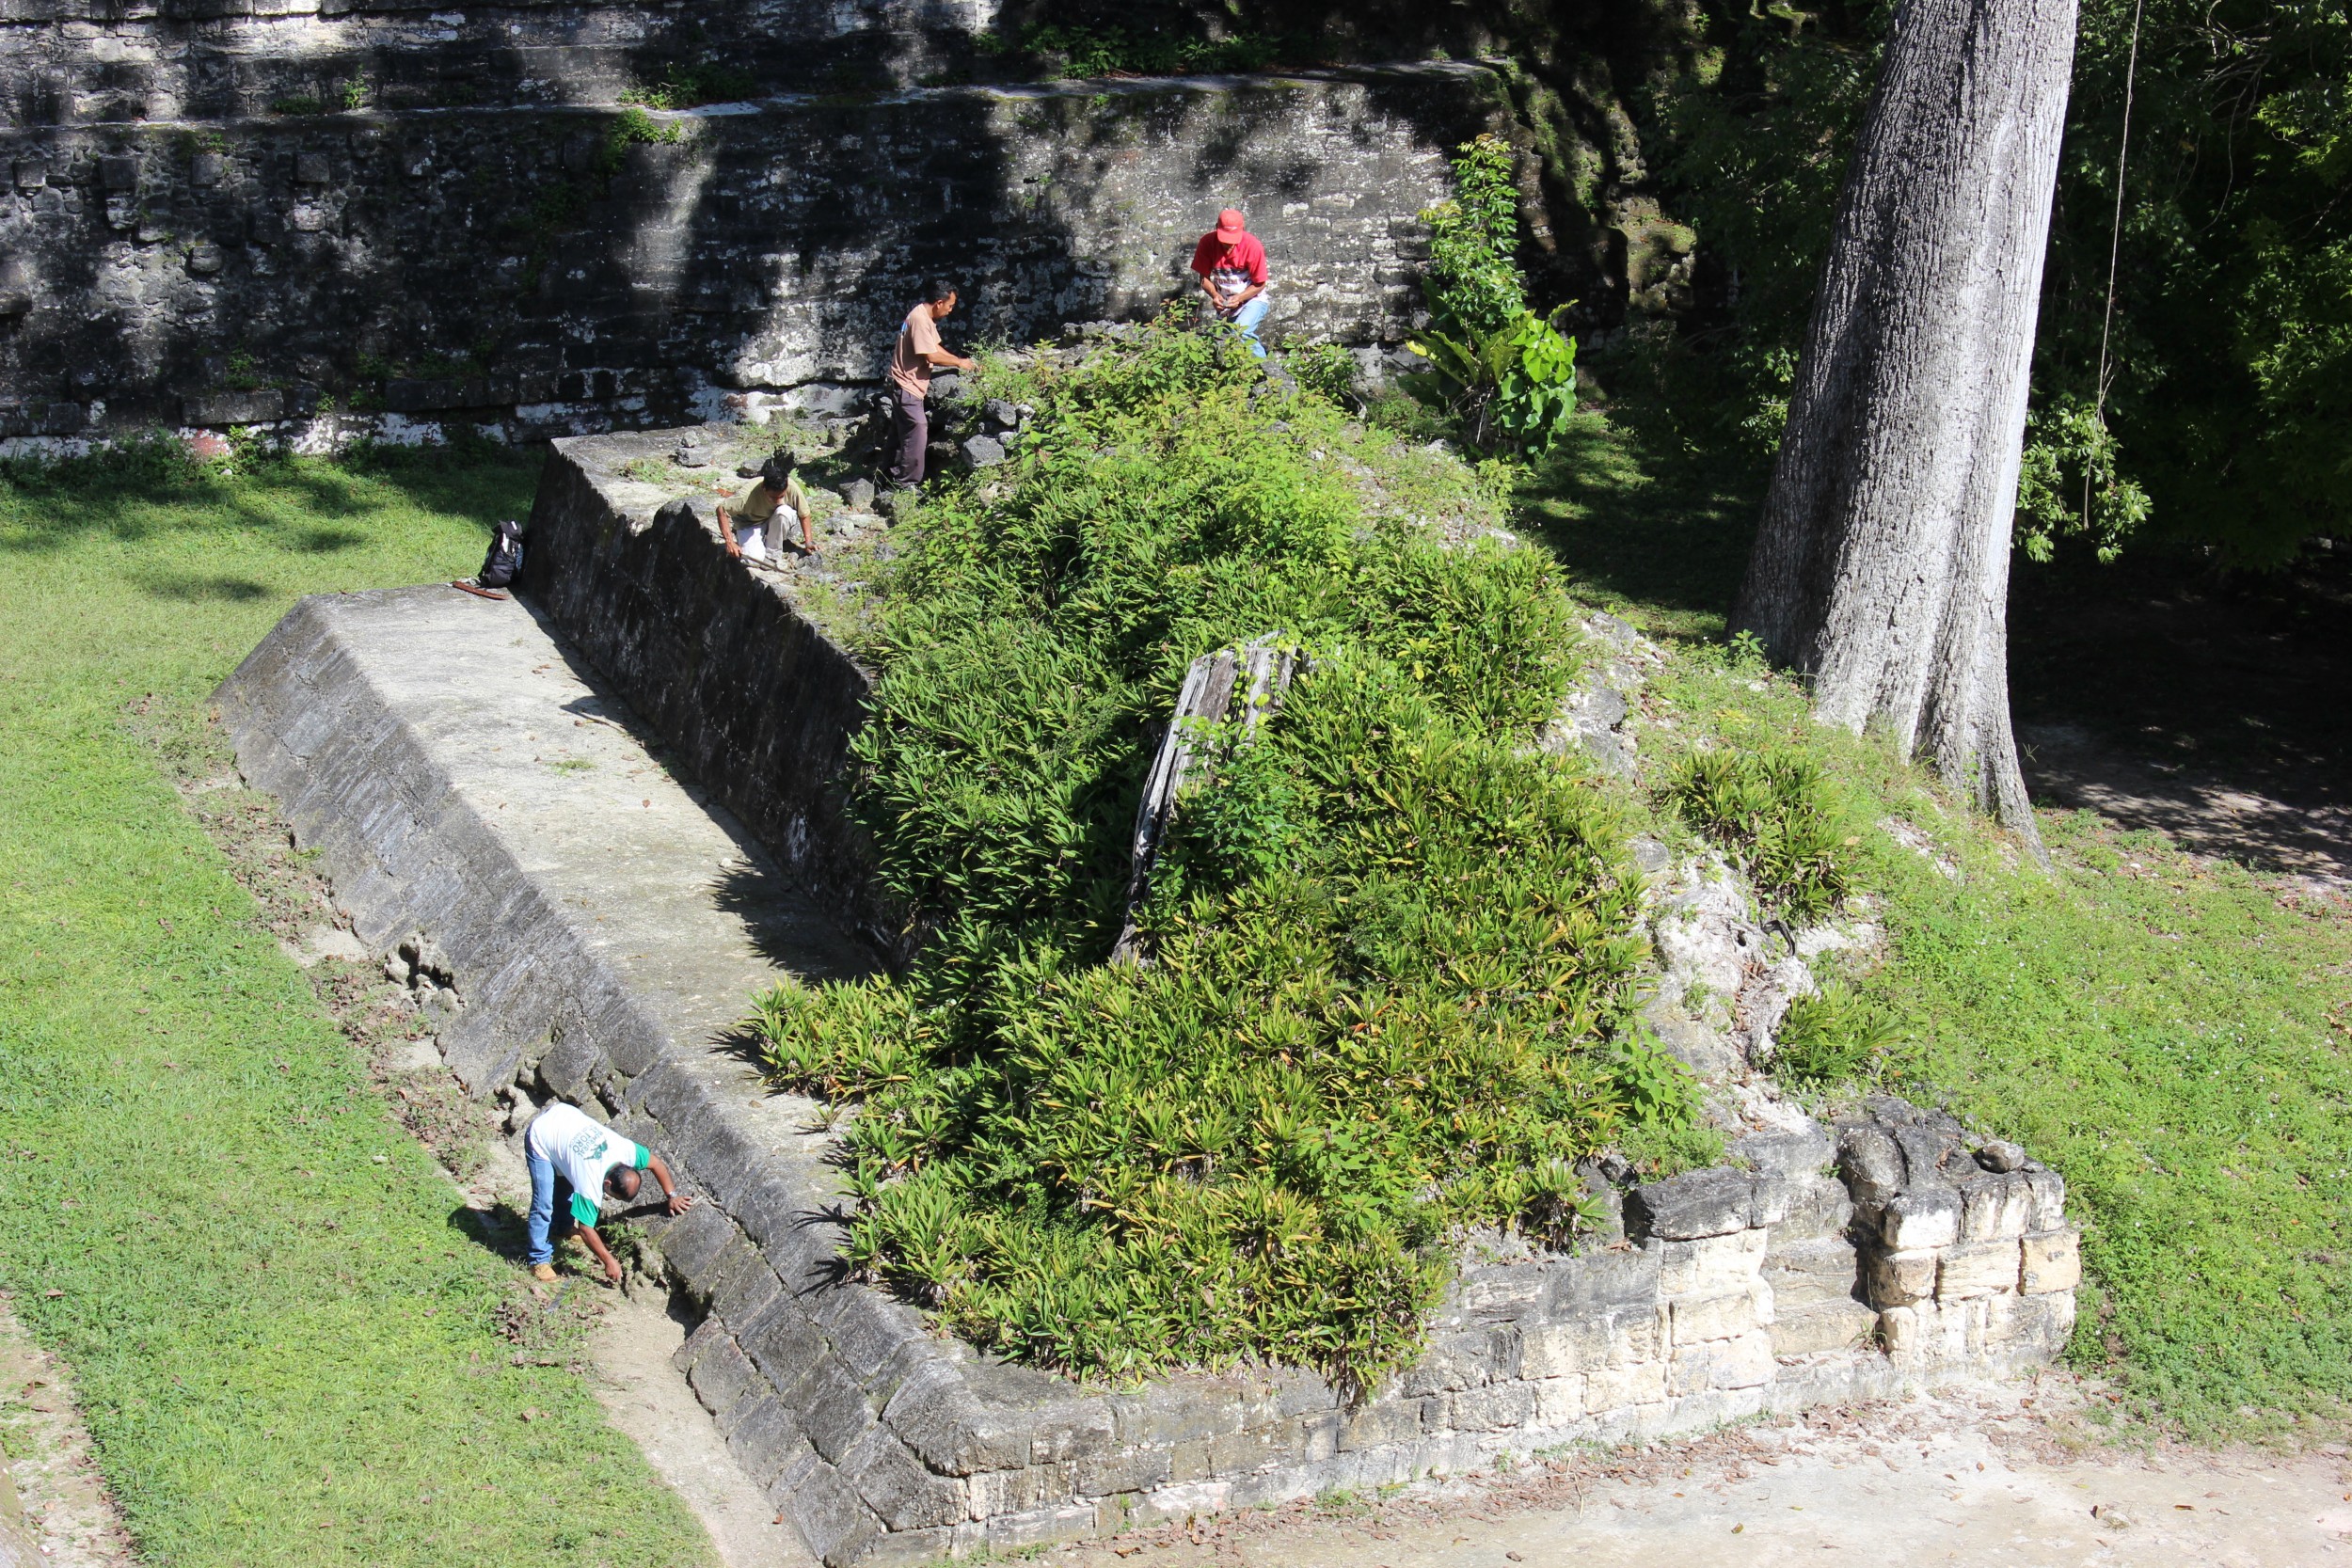 One of the magical parts of Tikal is that they are still working to uncover things.